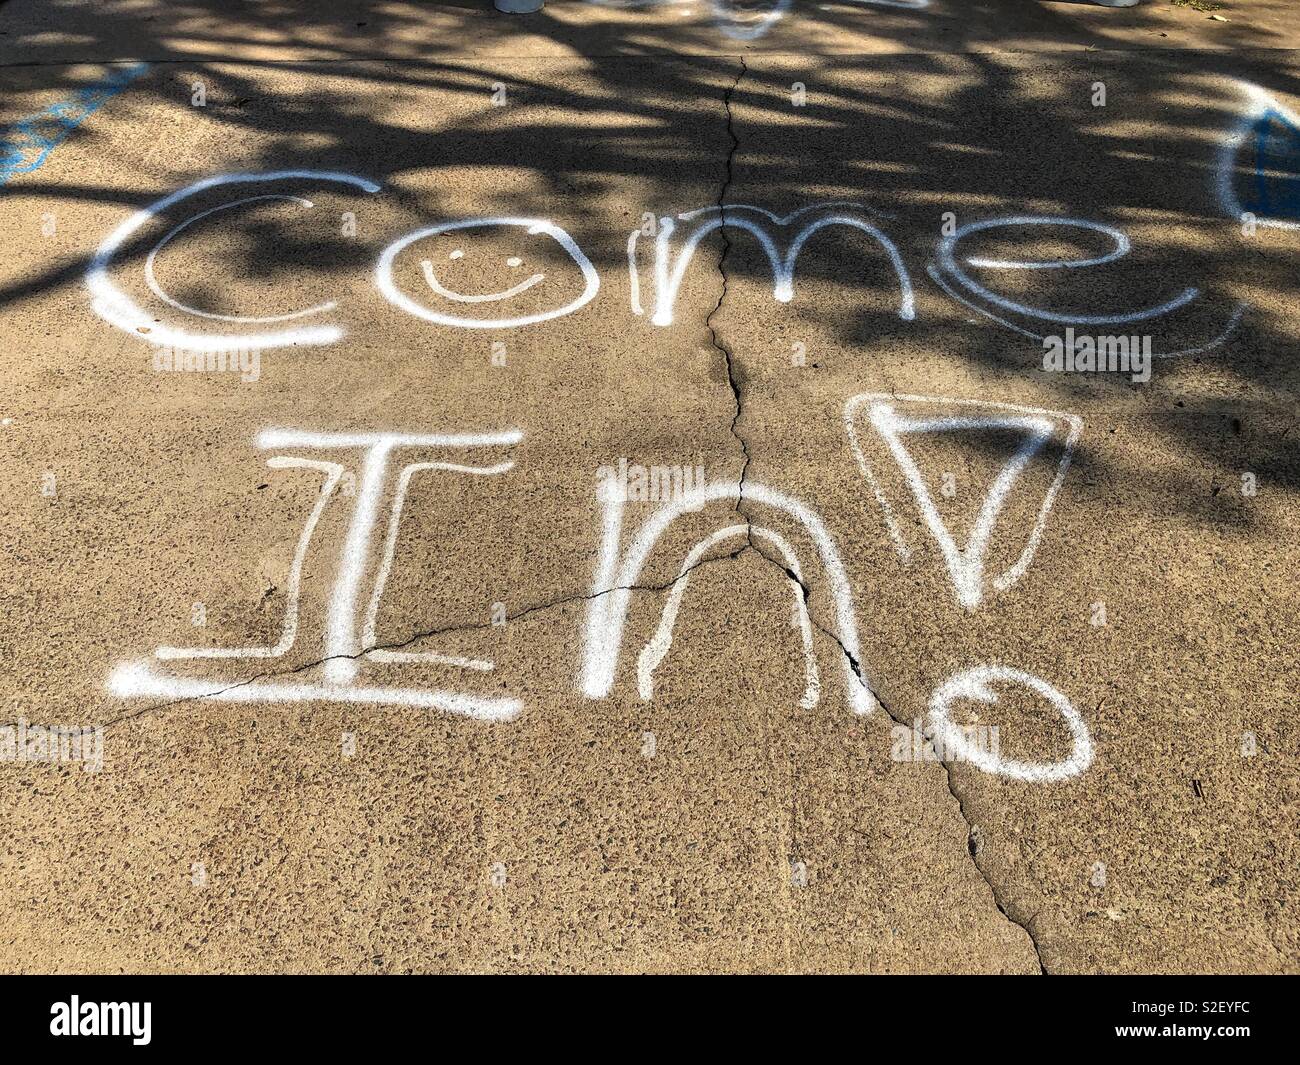 Come In graffitied on the sidewalk. Stock Photo